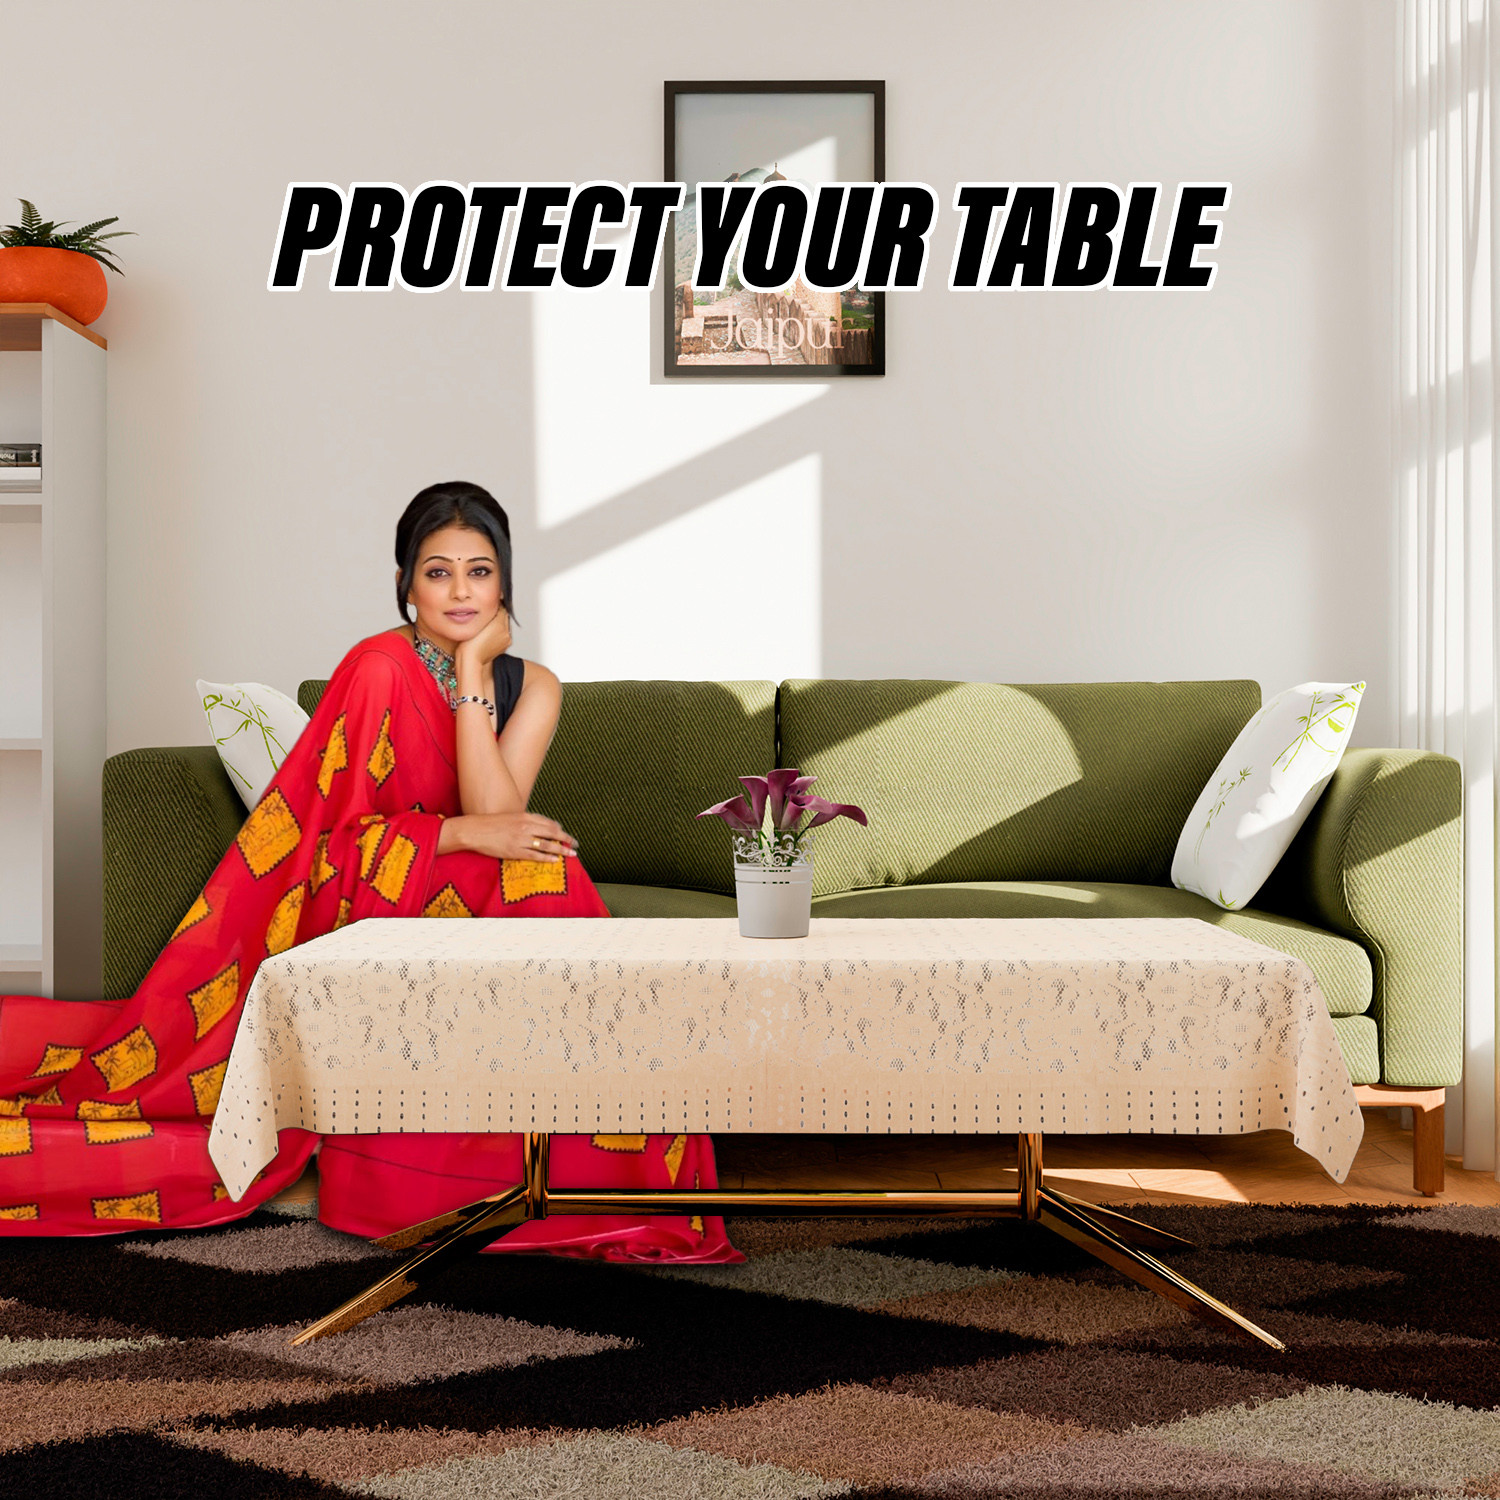 Kuber Industries Center Table Cover | Shinning Net Cashew Design Table Cover | Luxurious Table Protector Cover for Home Decor | 40x60 Inch | Cream